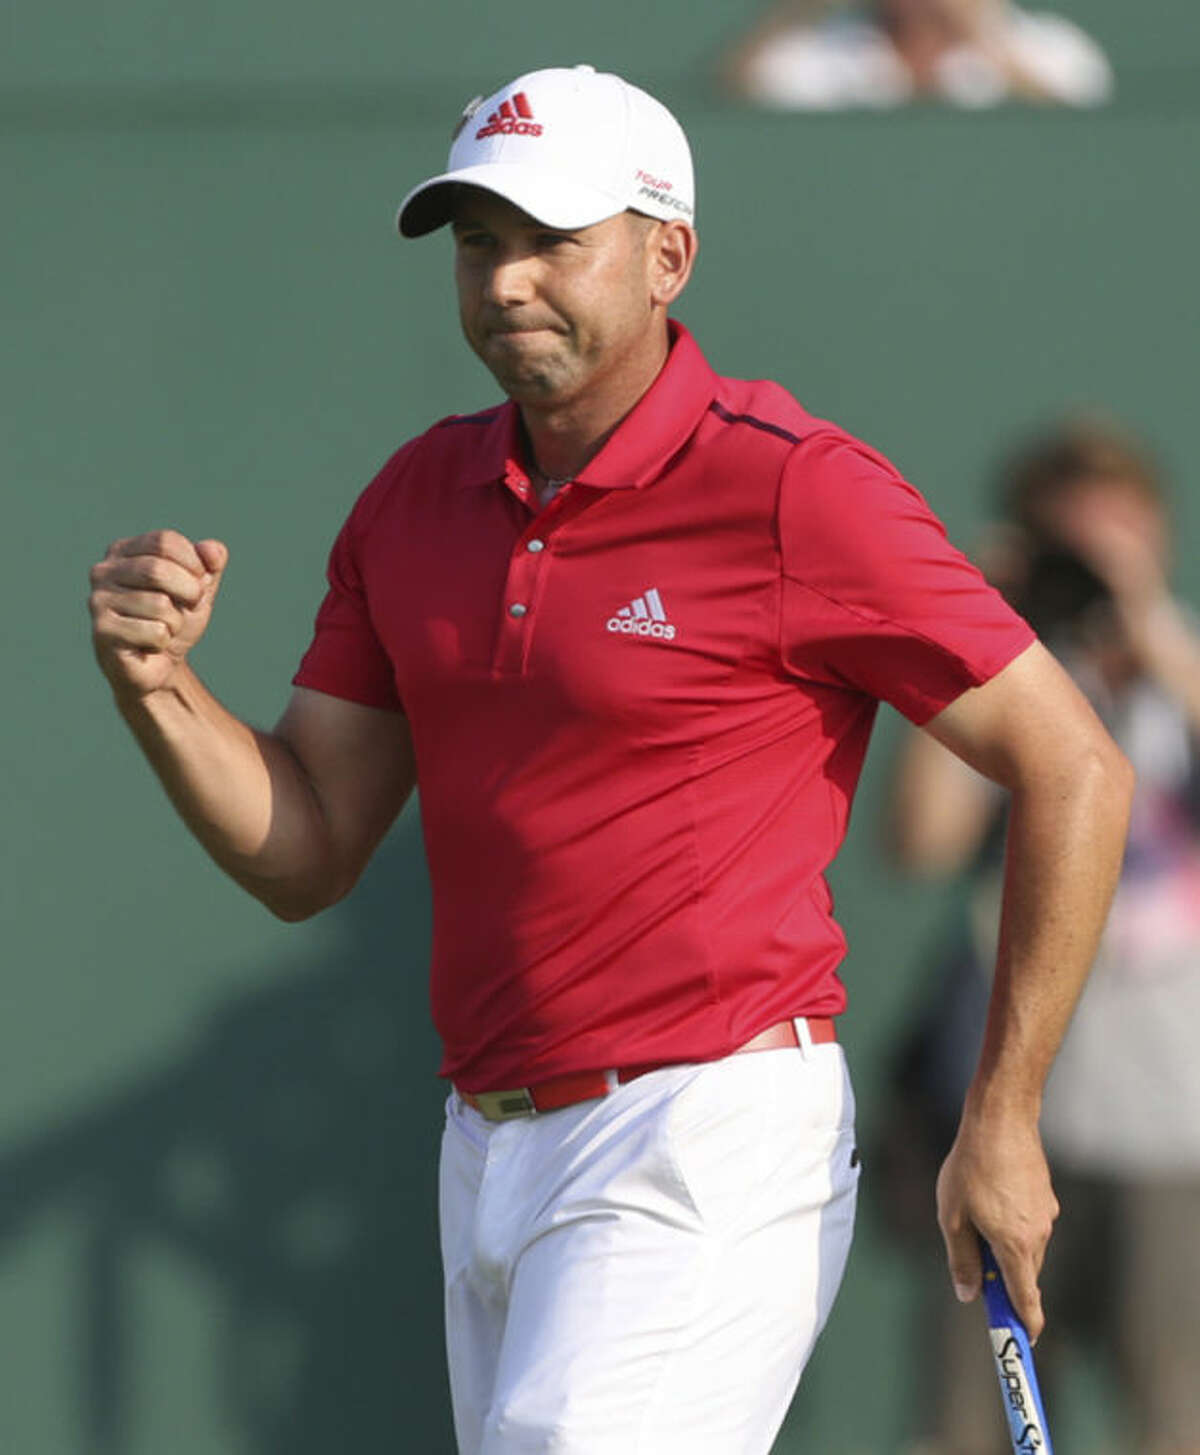 Sergio Garcia of Spain celebrates on the 18th green after finishing his round on the second day of the British Open Golf championship at the Royal Liverpool golf club, Hoylake, England, Friday July 18, 2014. (AP Photo/Peter Morrison)